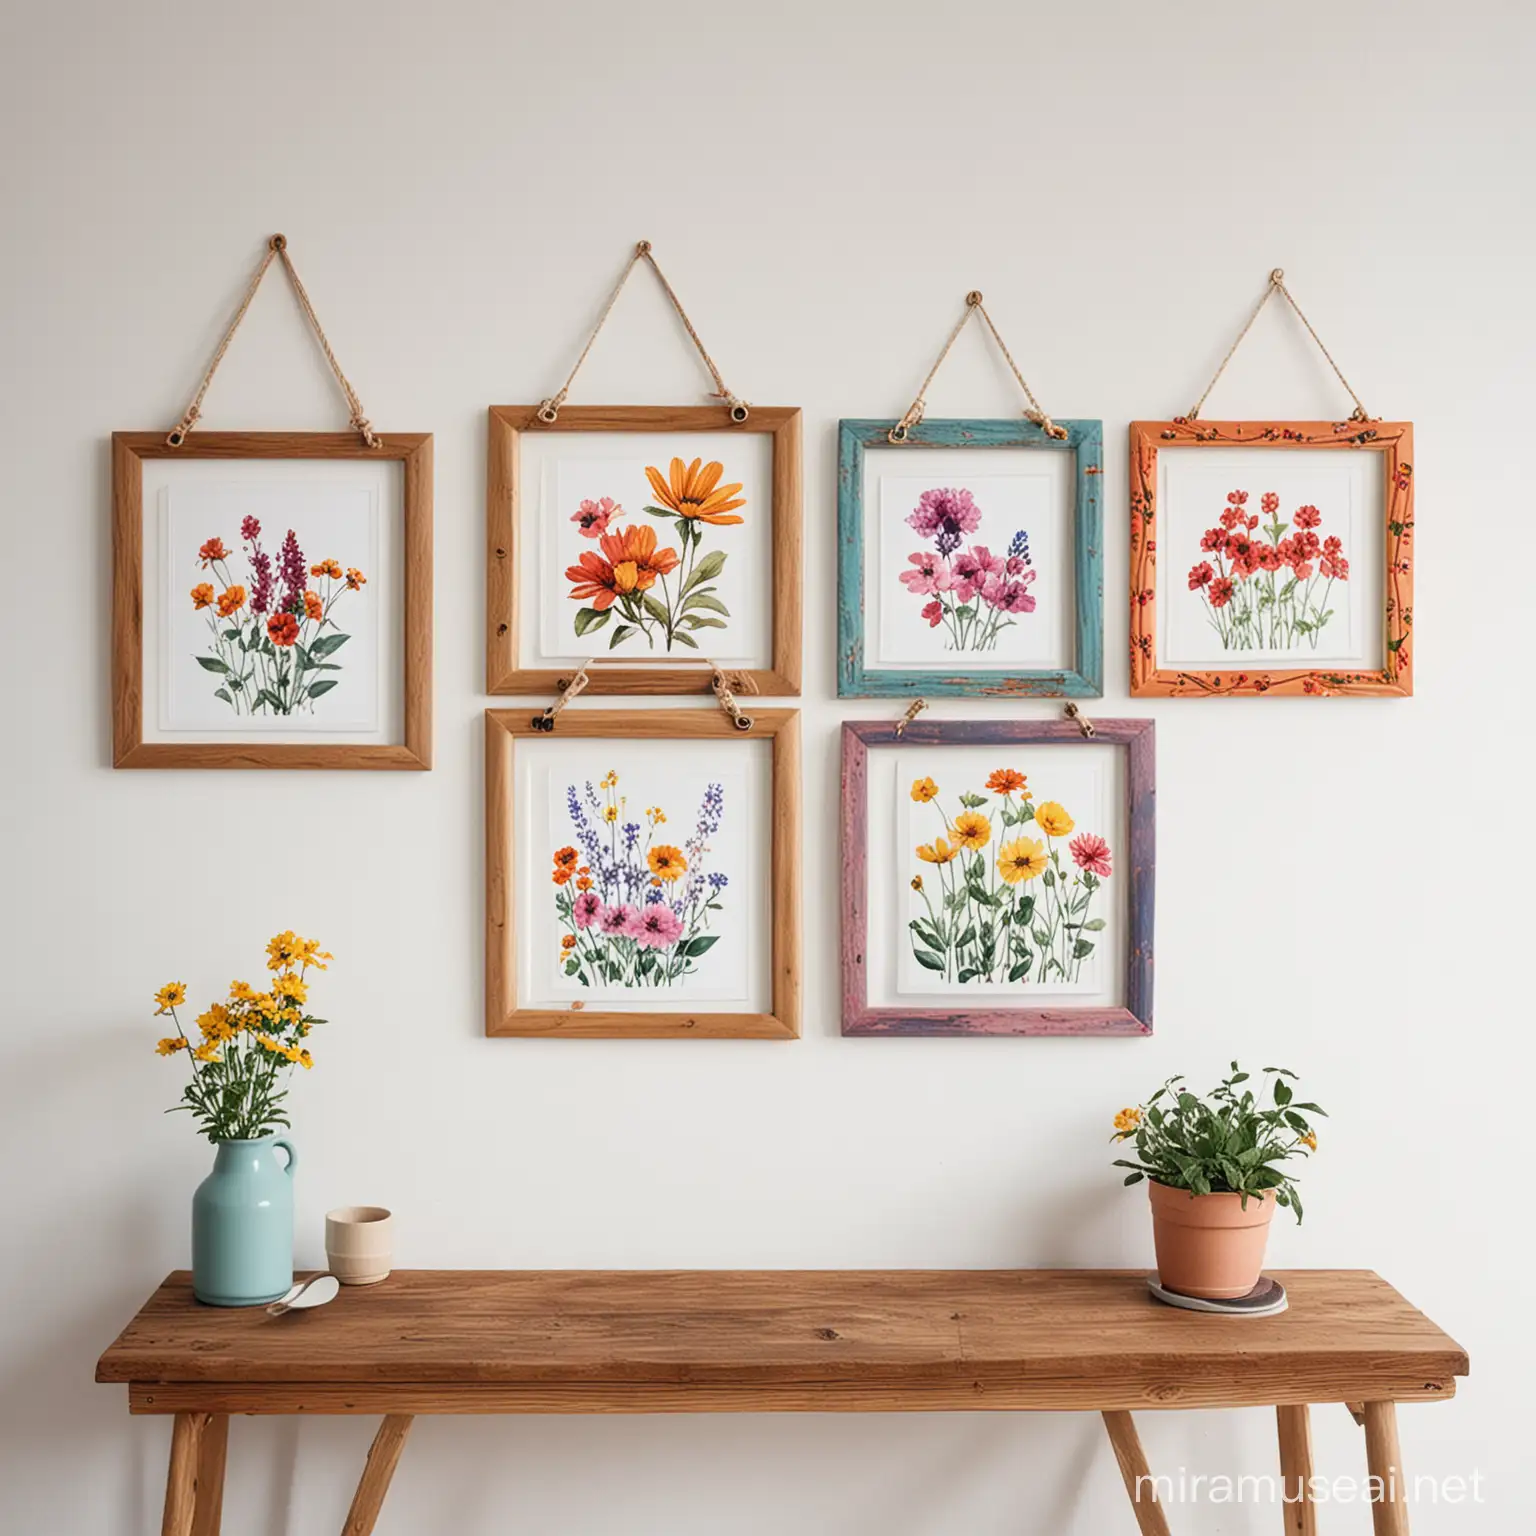 5 wooden frames hang on the white wall with colourfull flower